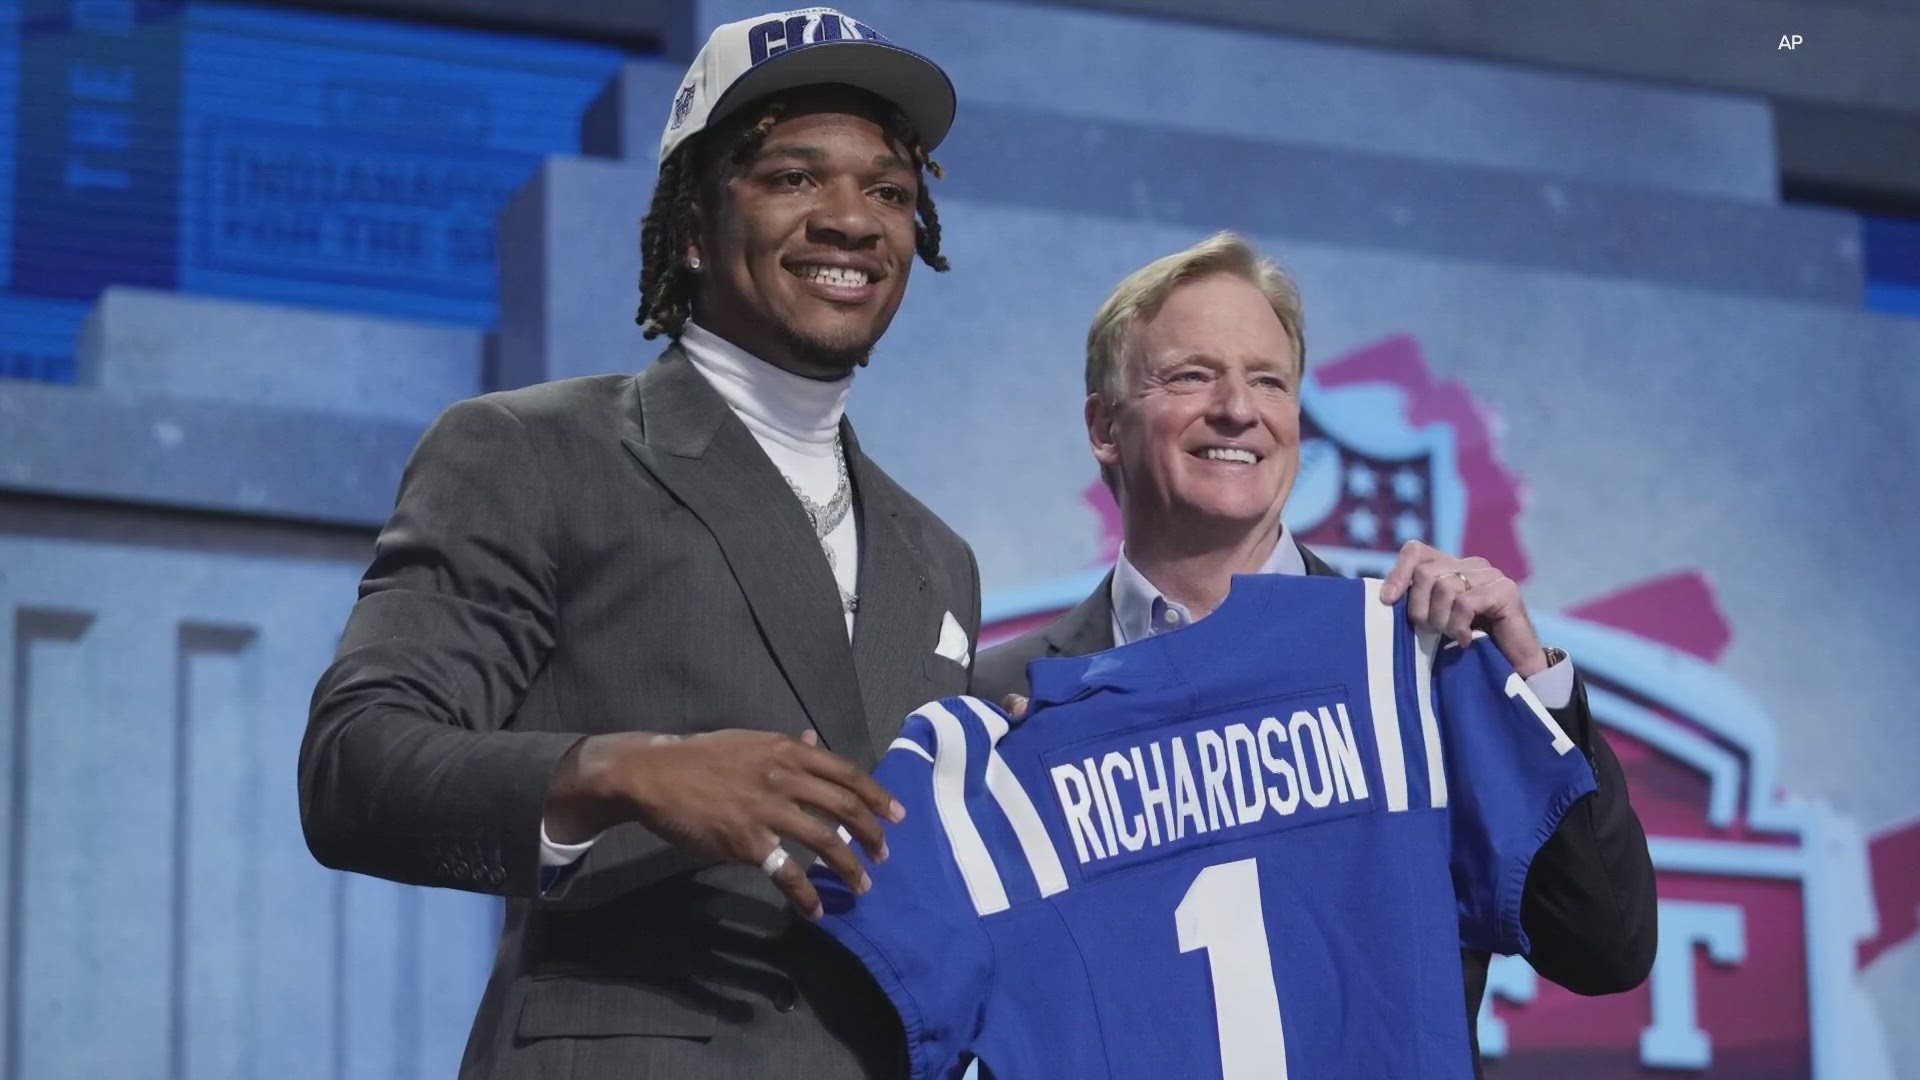 The athletic Richardson could help the Colts re-emerge as a playoff contender perhaps sooner rather than many expected.